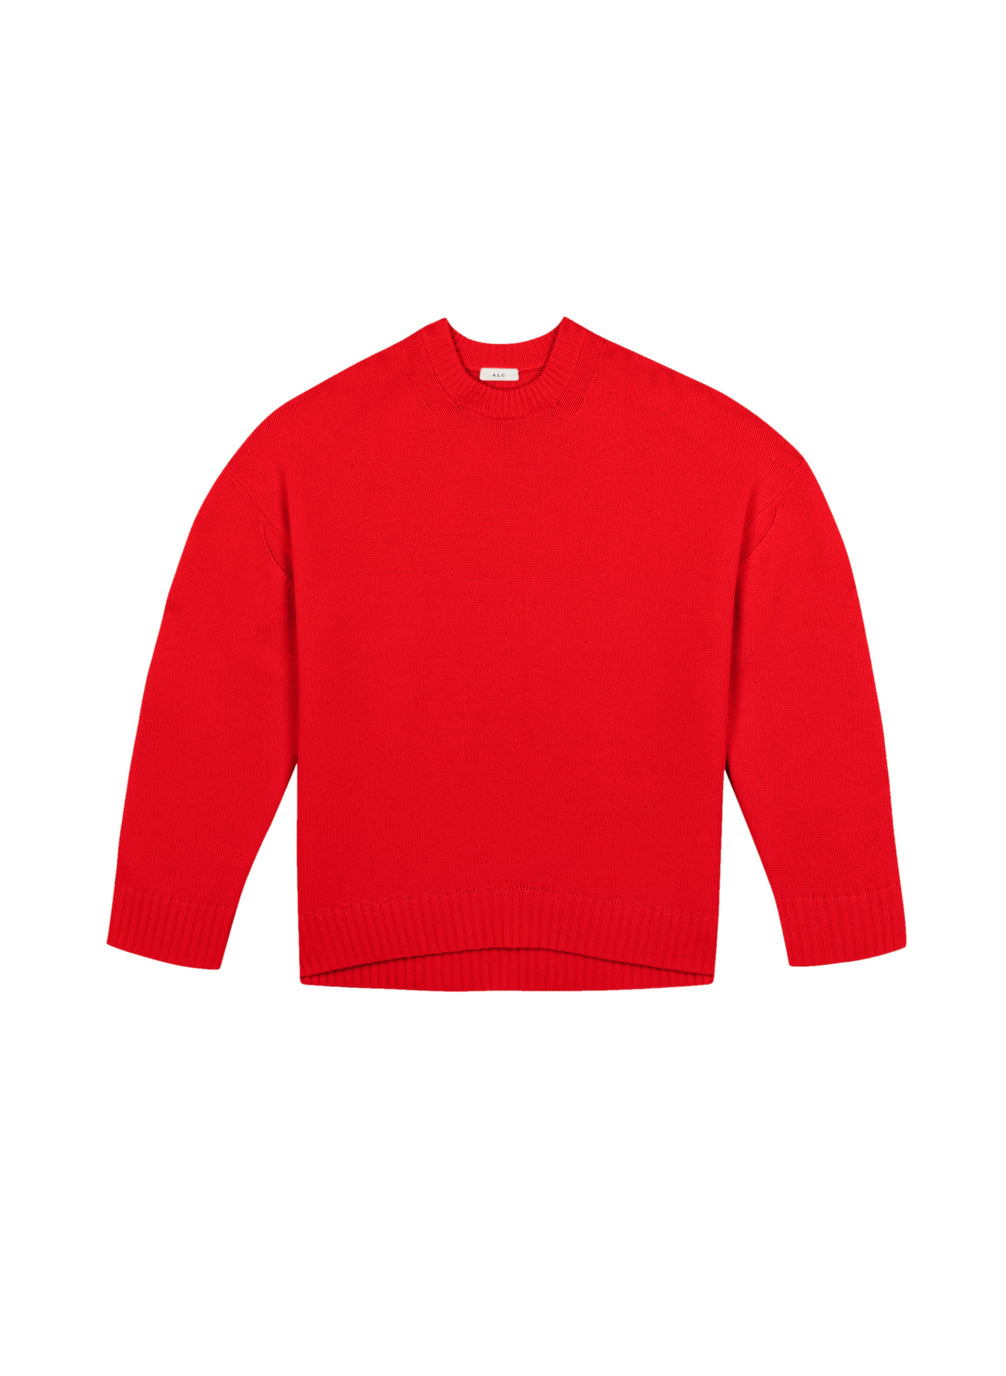 flat lay view of red cashmere long sleeve sweater